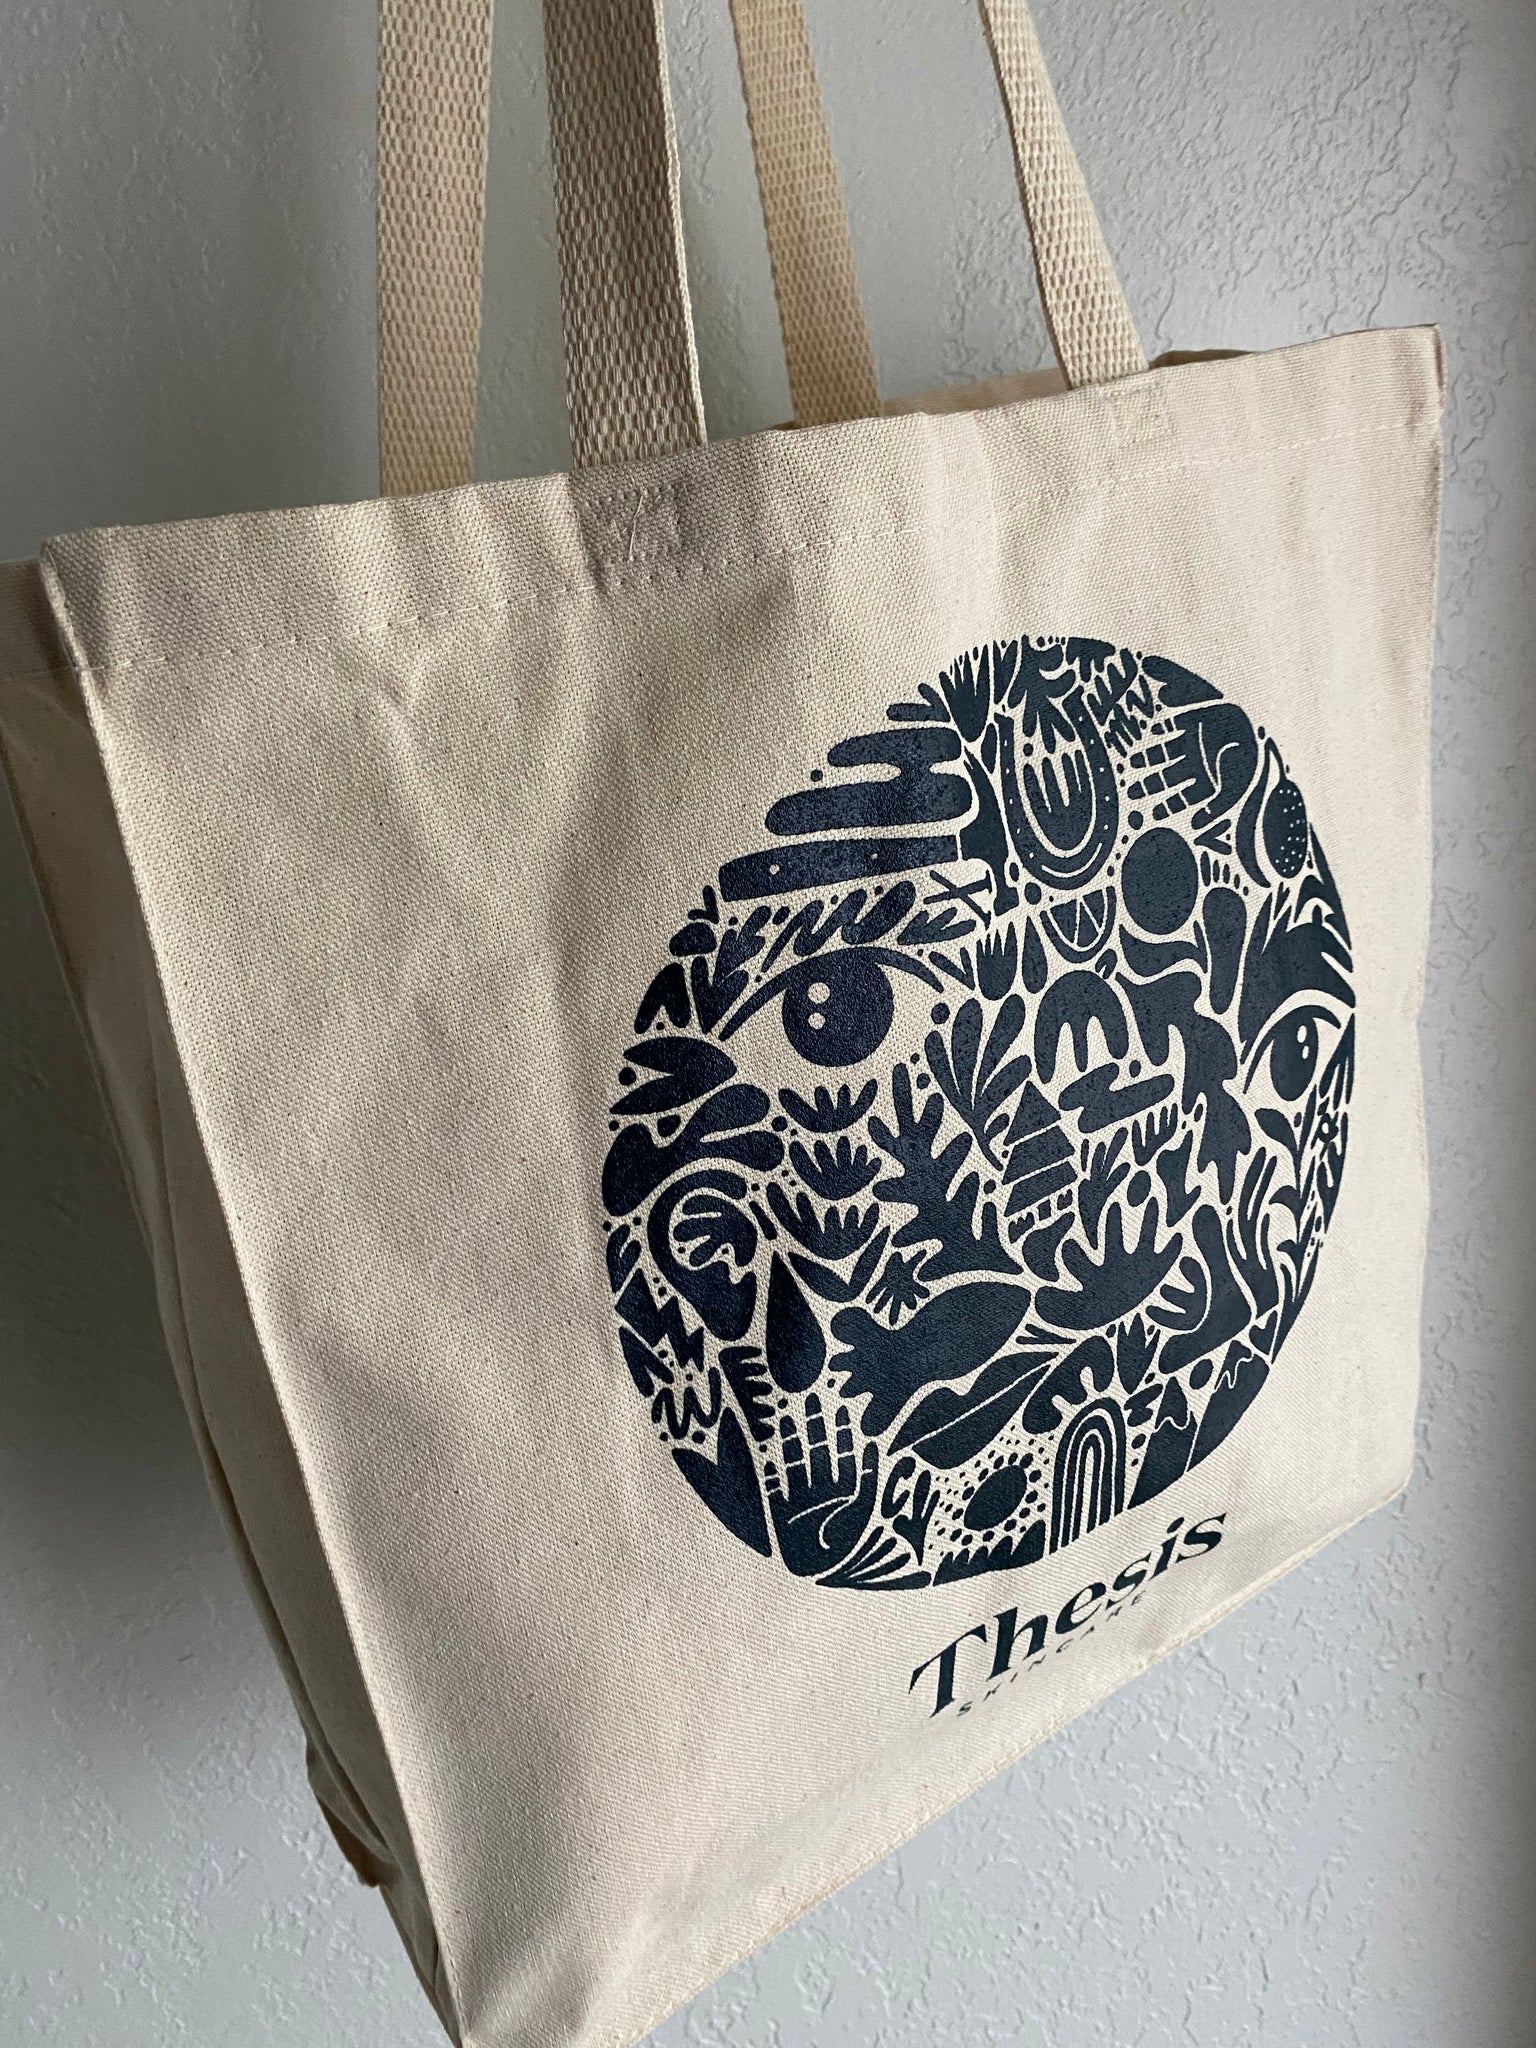 Thesis Tote